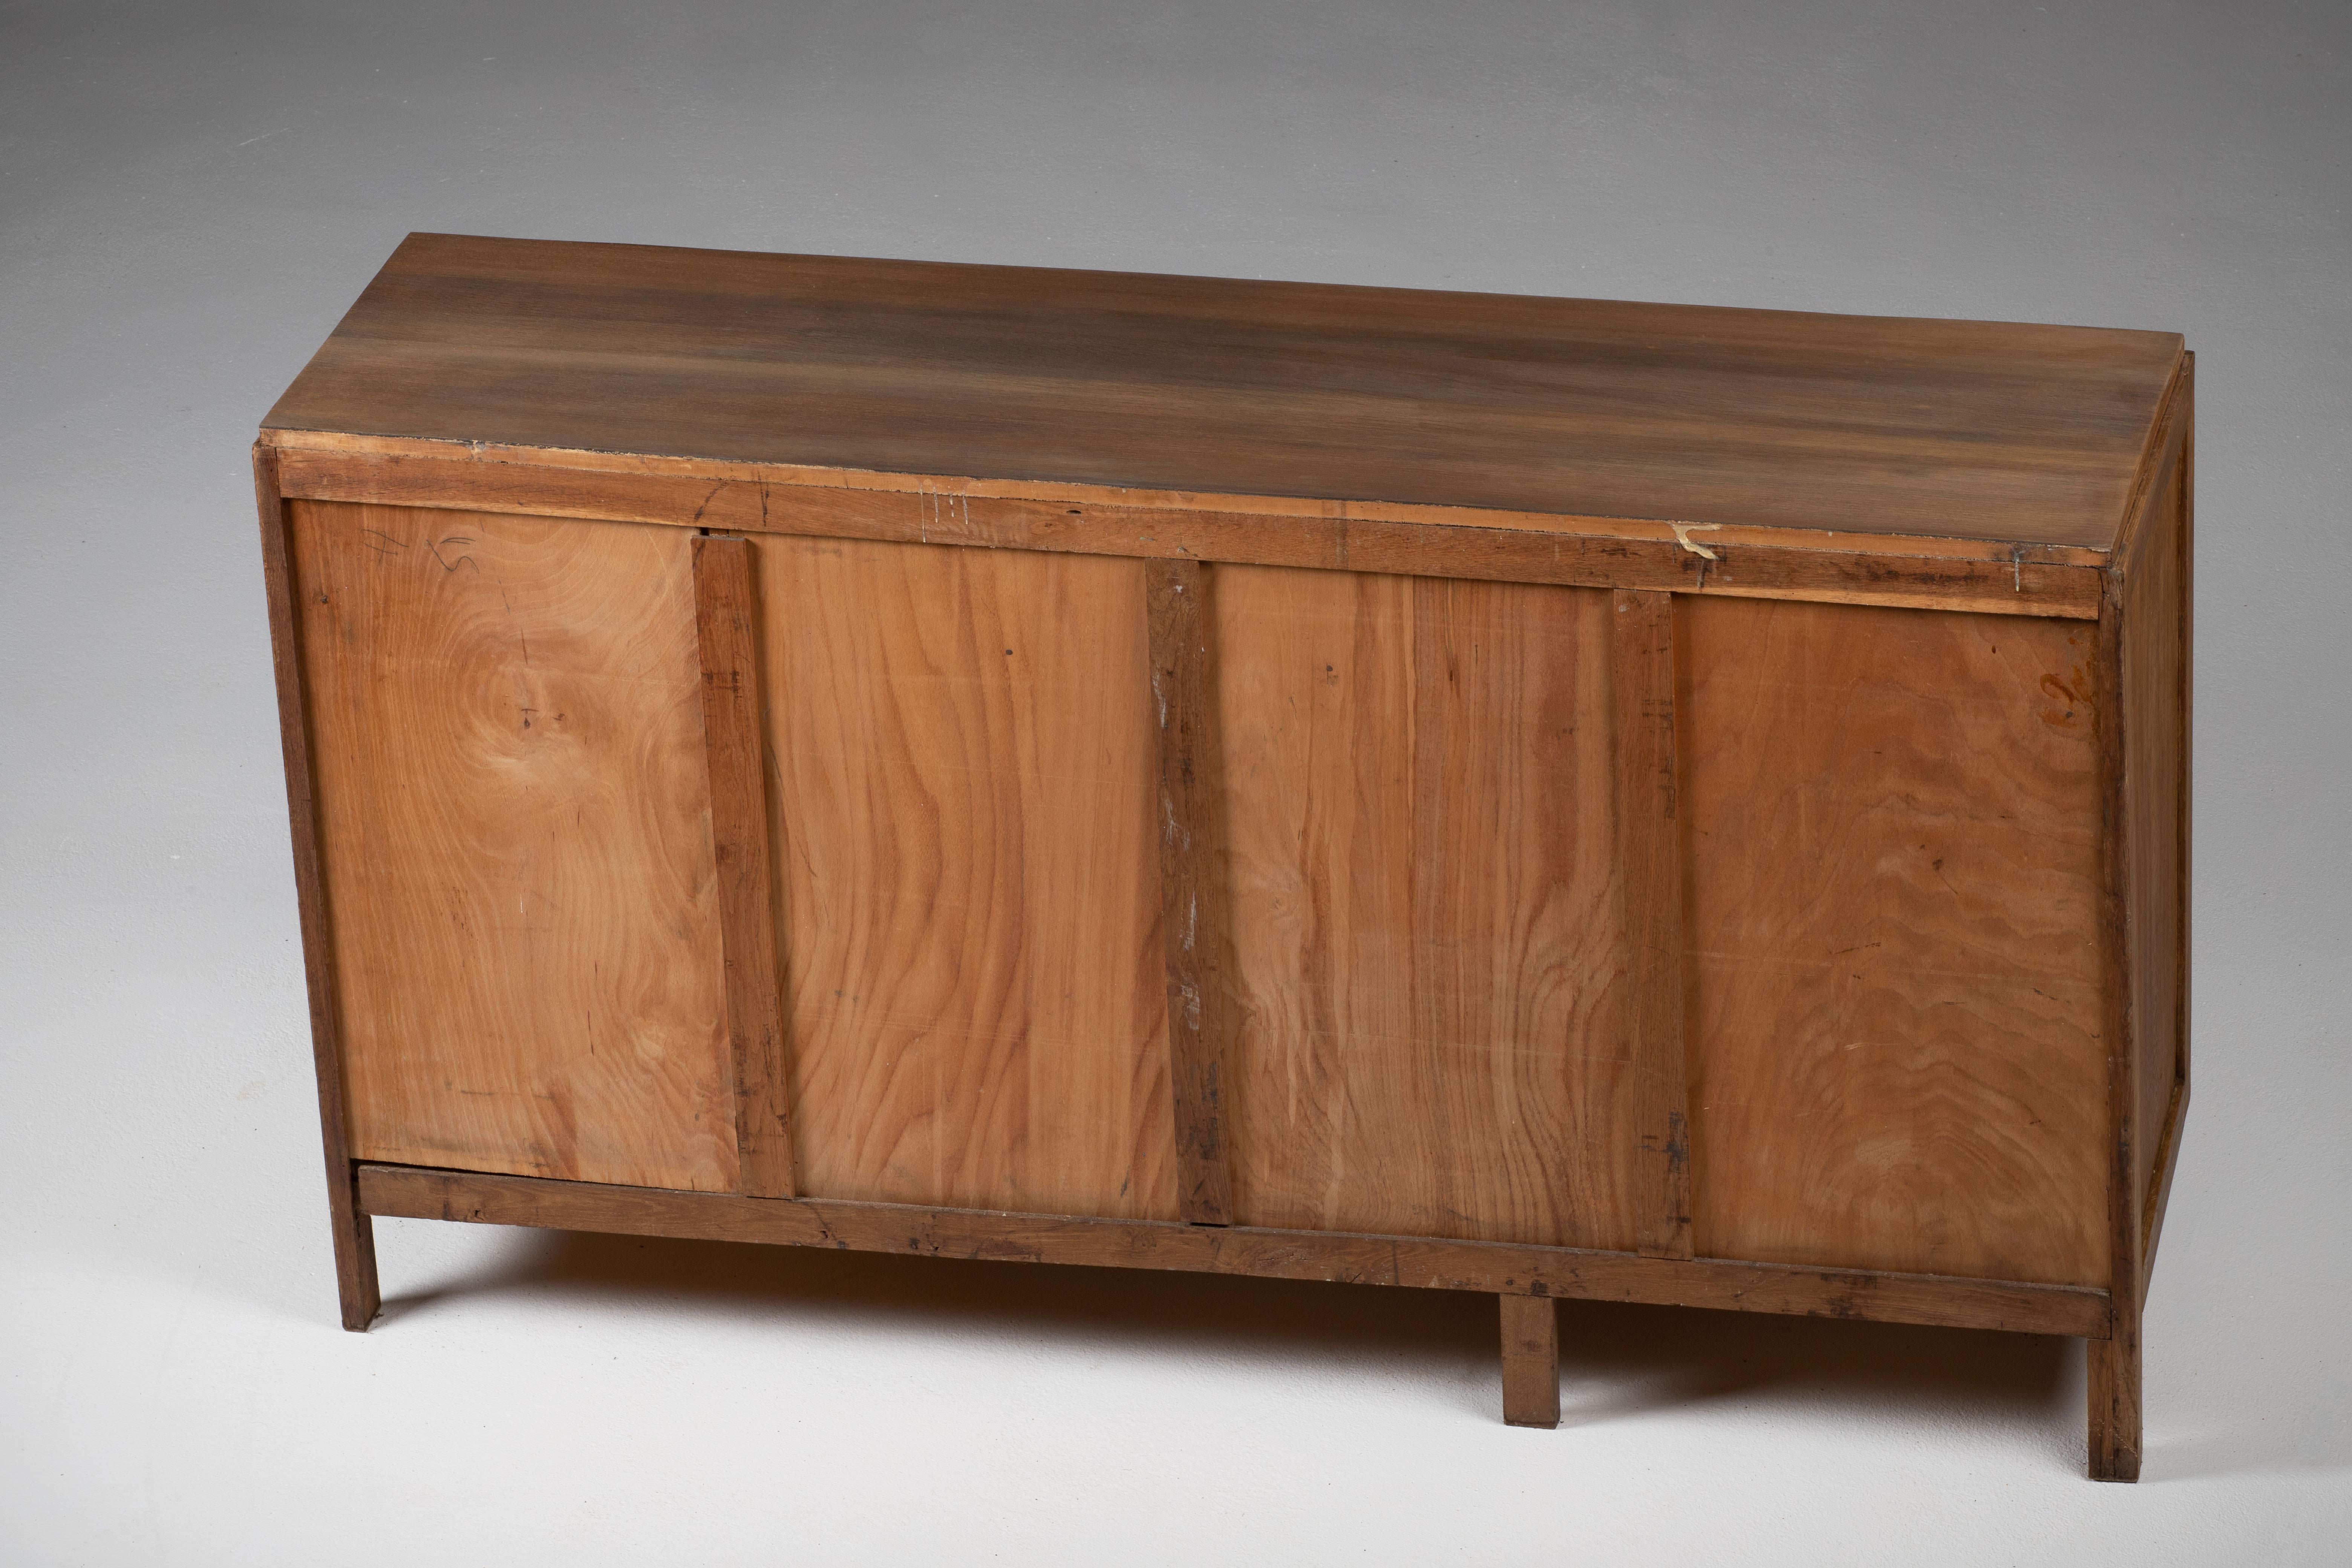 Credenza, solid oak, France, 1940s.
Large Art Deco Brutalist sideboard. 
This is a typical reconstruction piece, straight lines and quality materials.
Condition report : right door is warped, the doors can be shut but not locked.